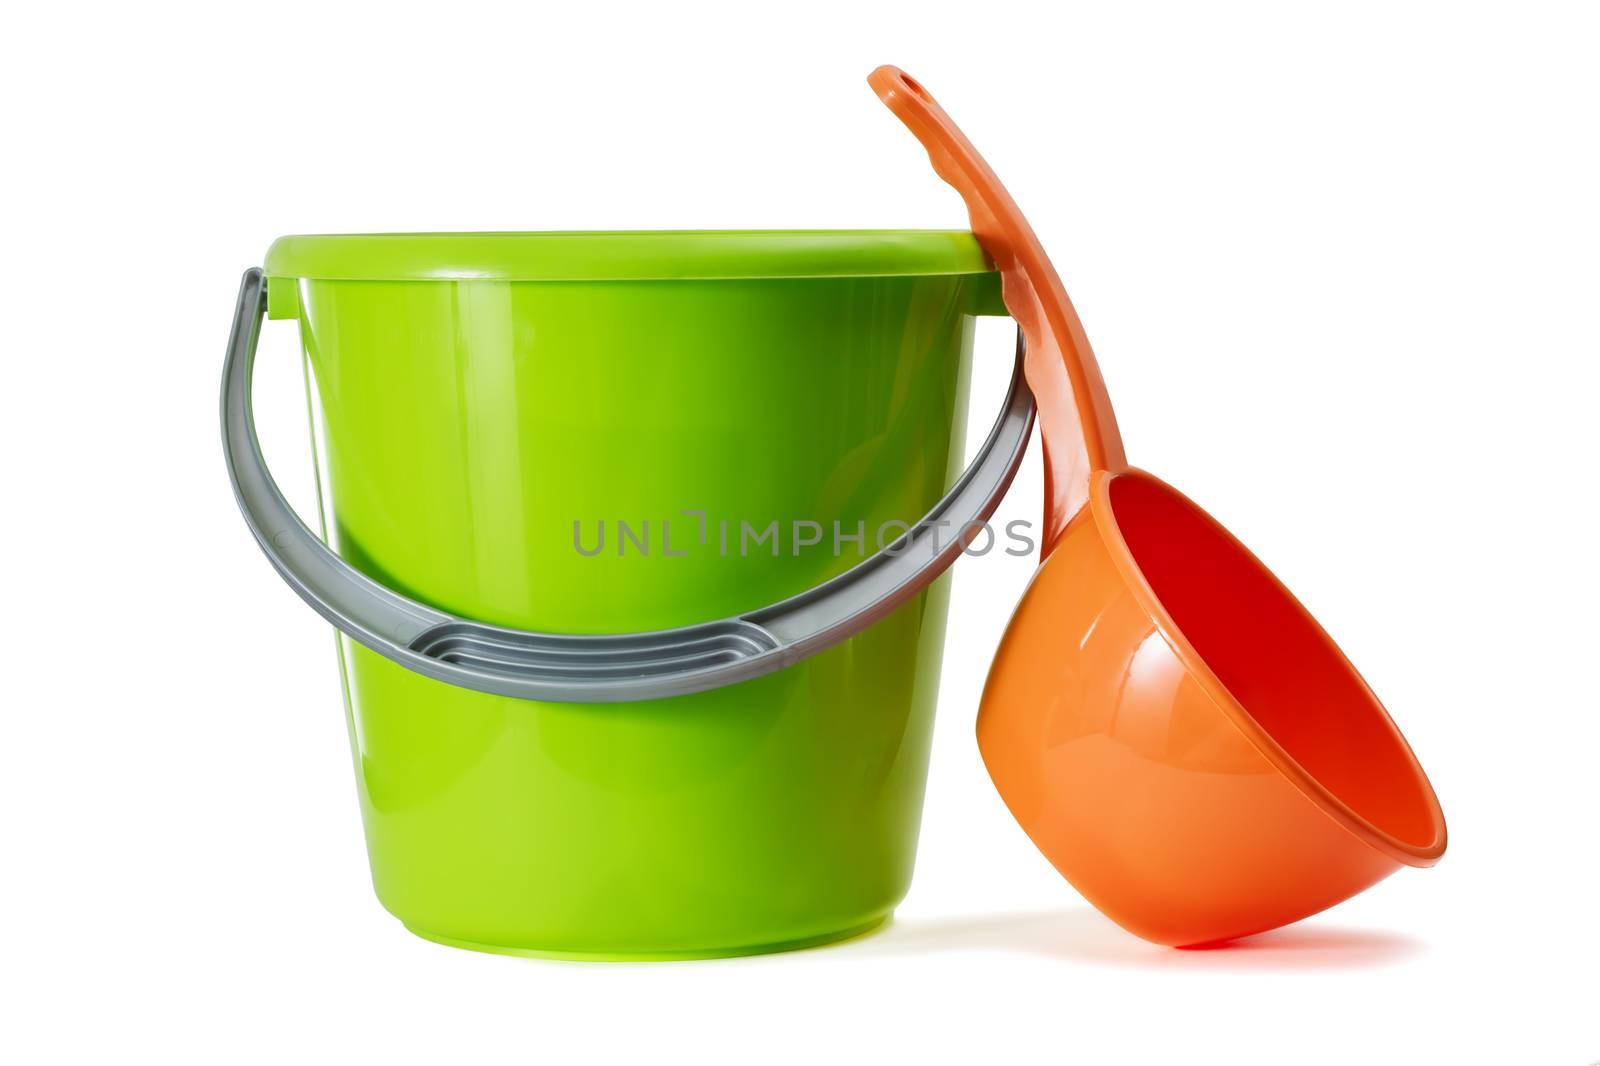 The green plastic bucket and red ladle is isolated on a white background